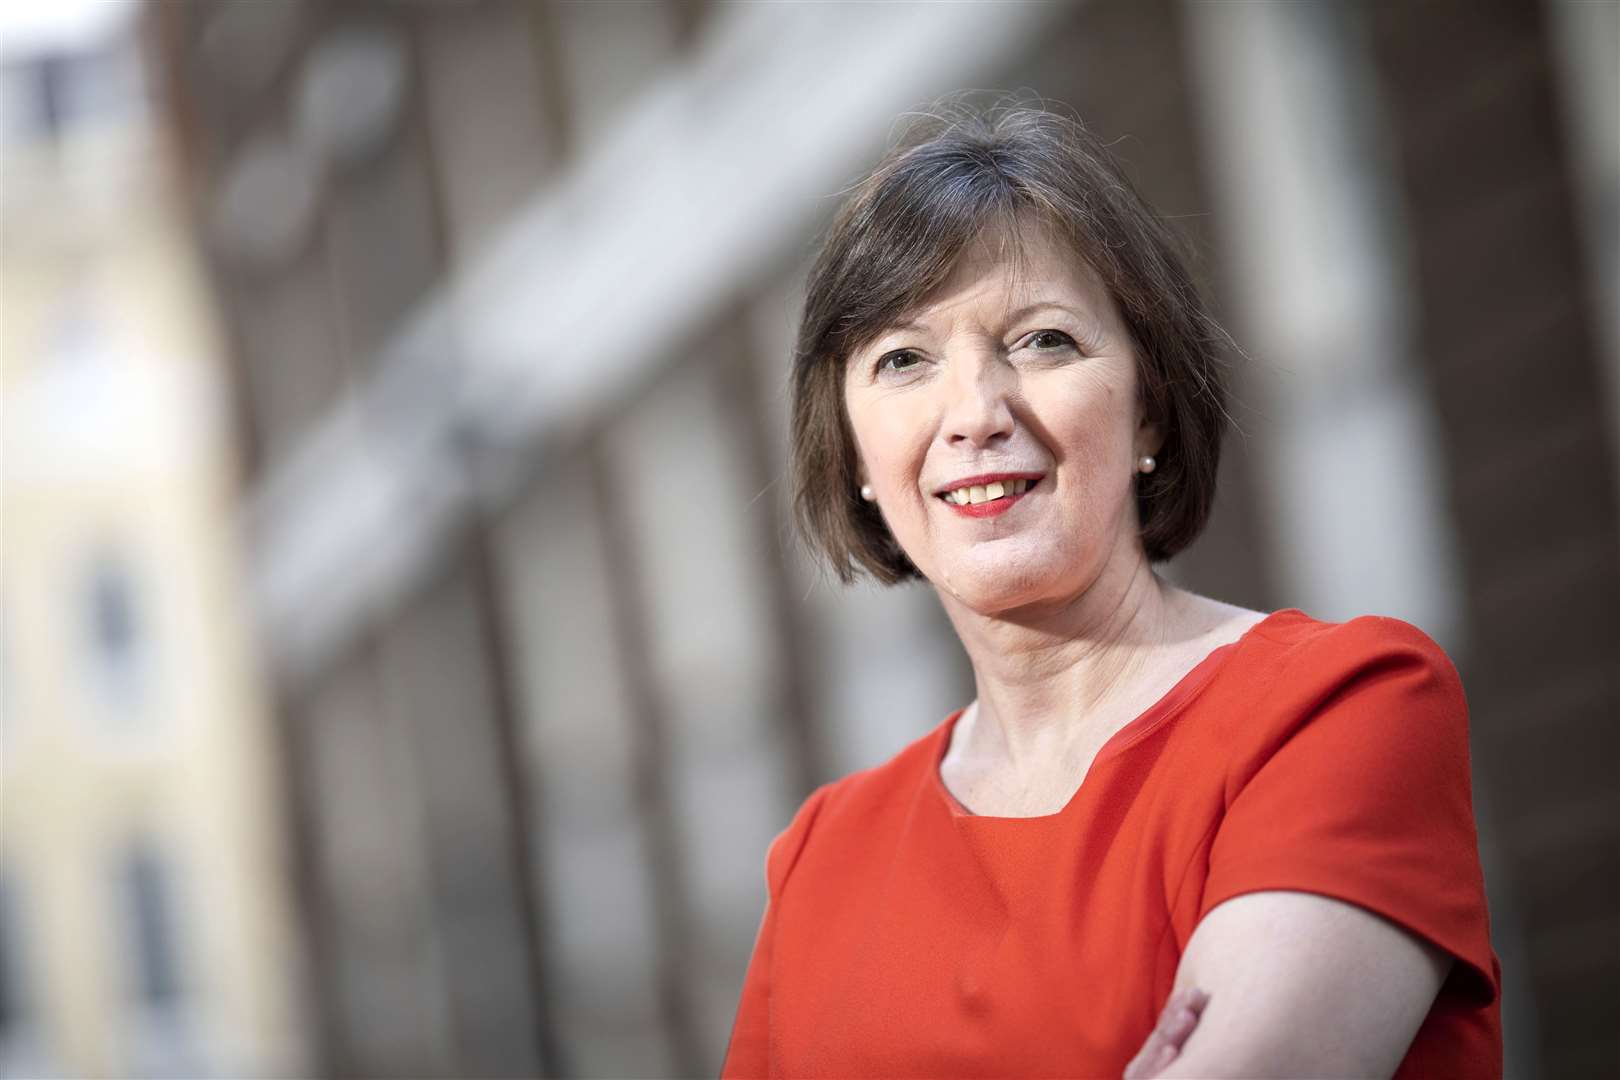 Frances O’Grady TUC general secretary, is calling for parents to be offered furlough if struggling with child care. Picture: Jess Hurd